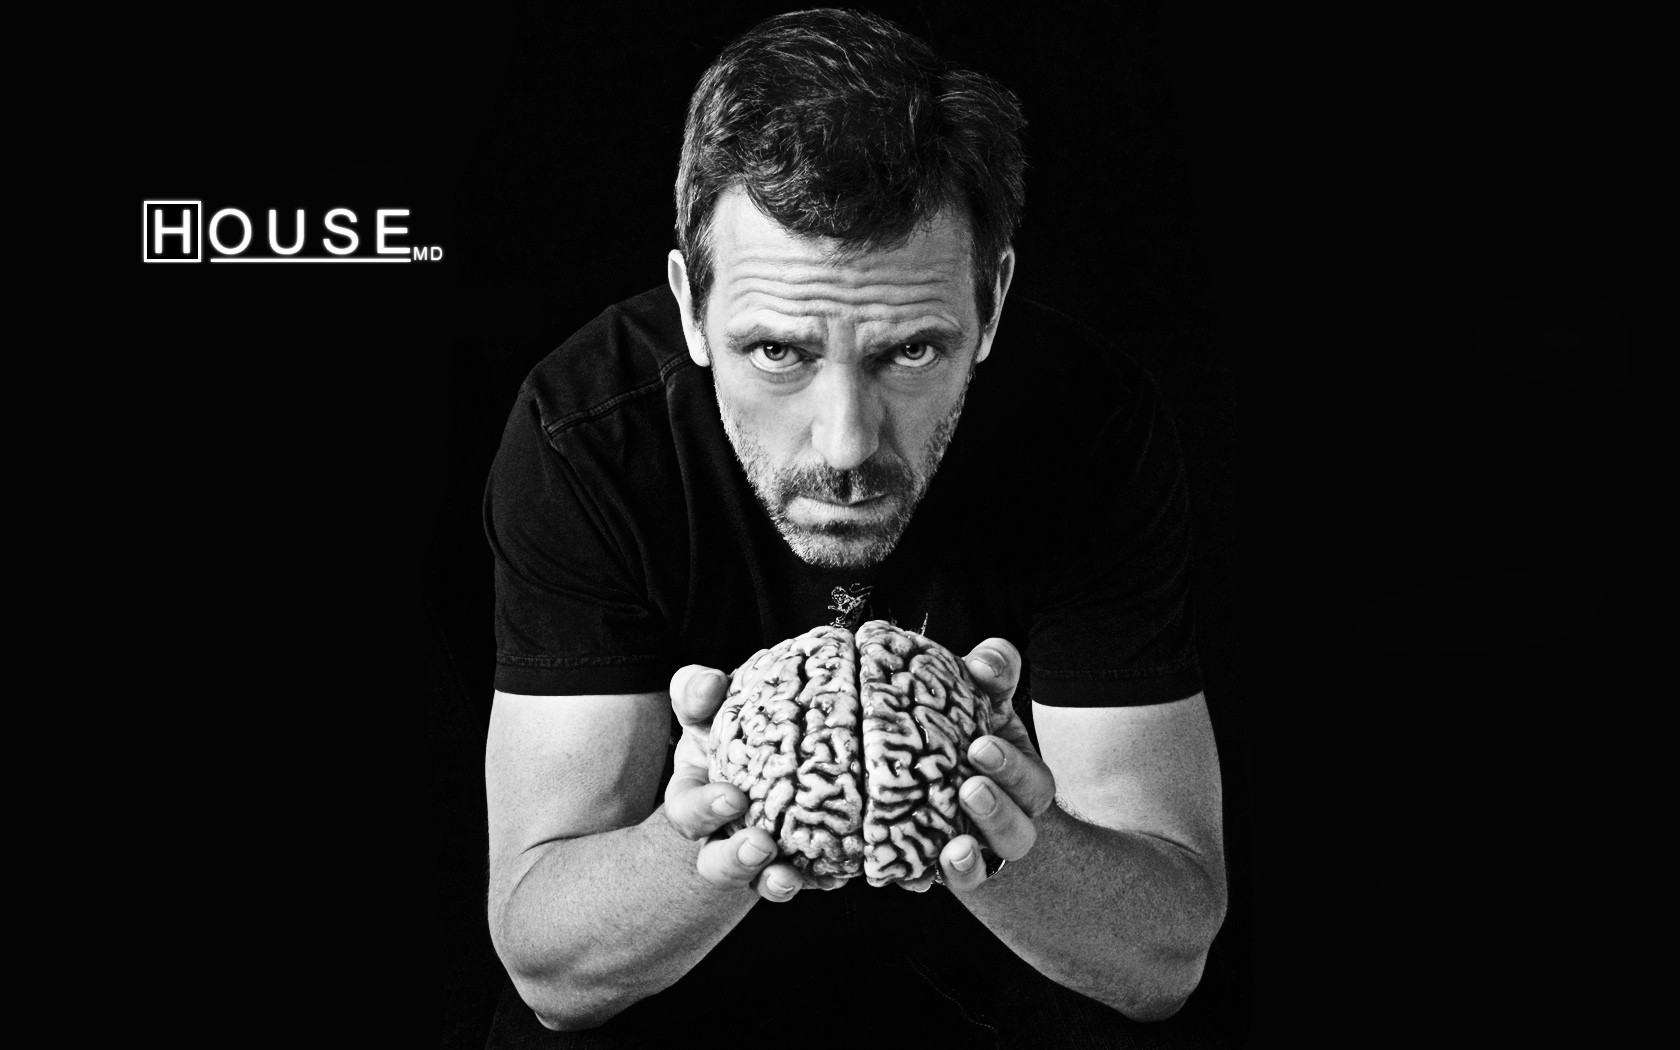 General 1680x1050 House, M.D. brain Hugh Laurie actor men monochrome TV series simple background black background looking at viewer